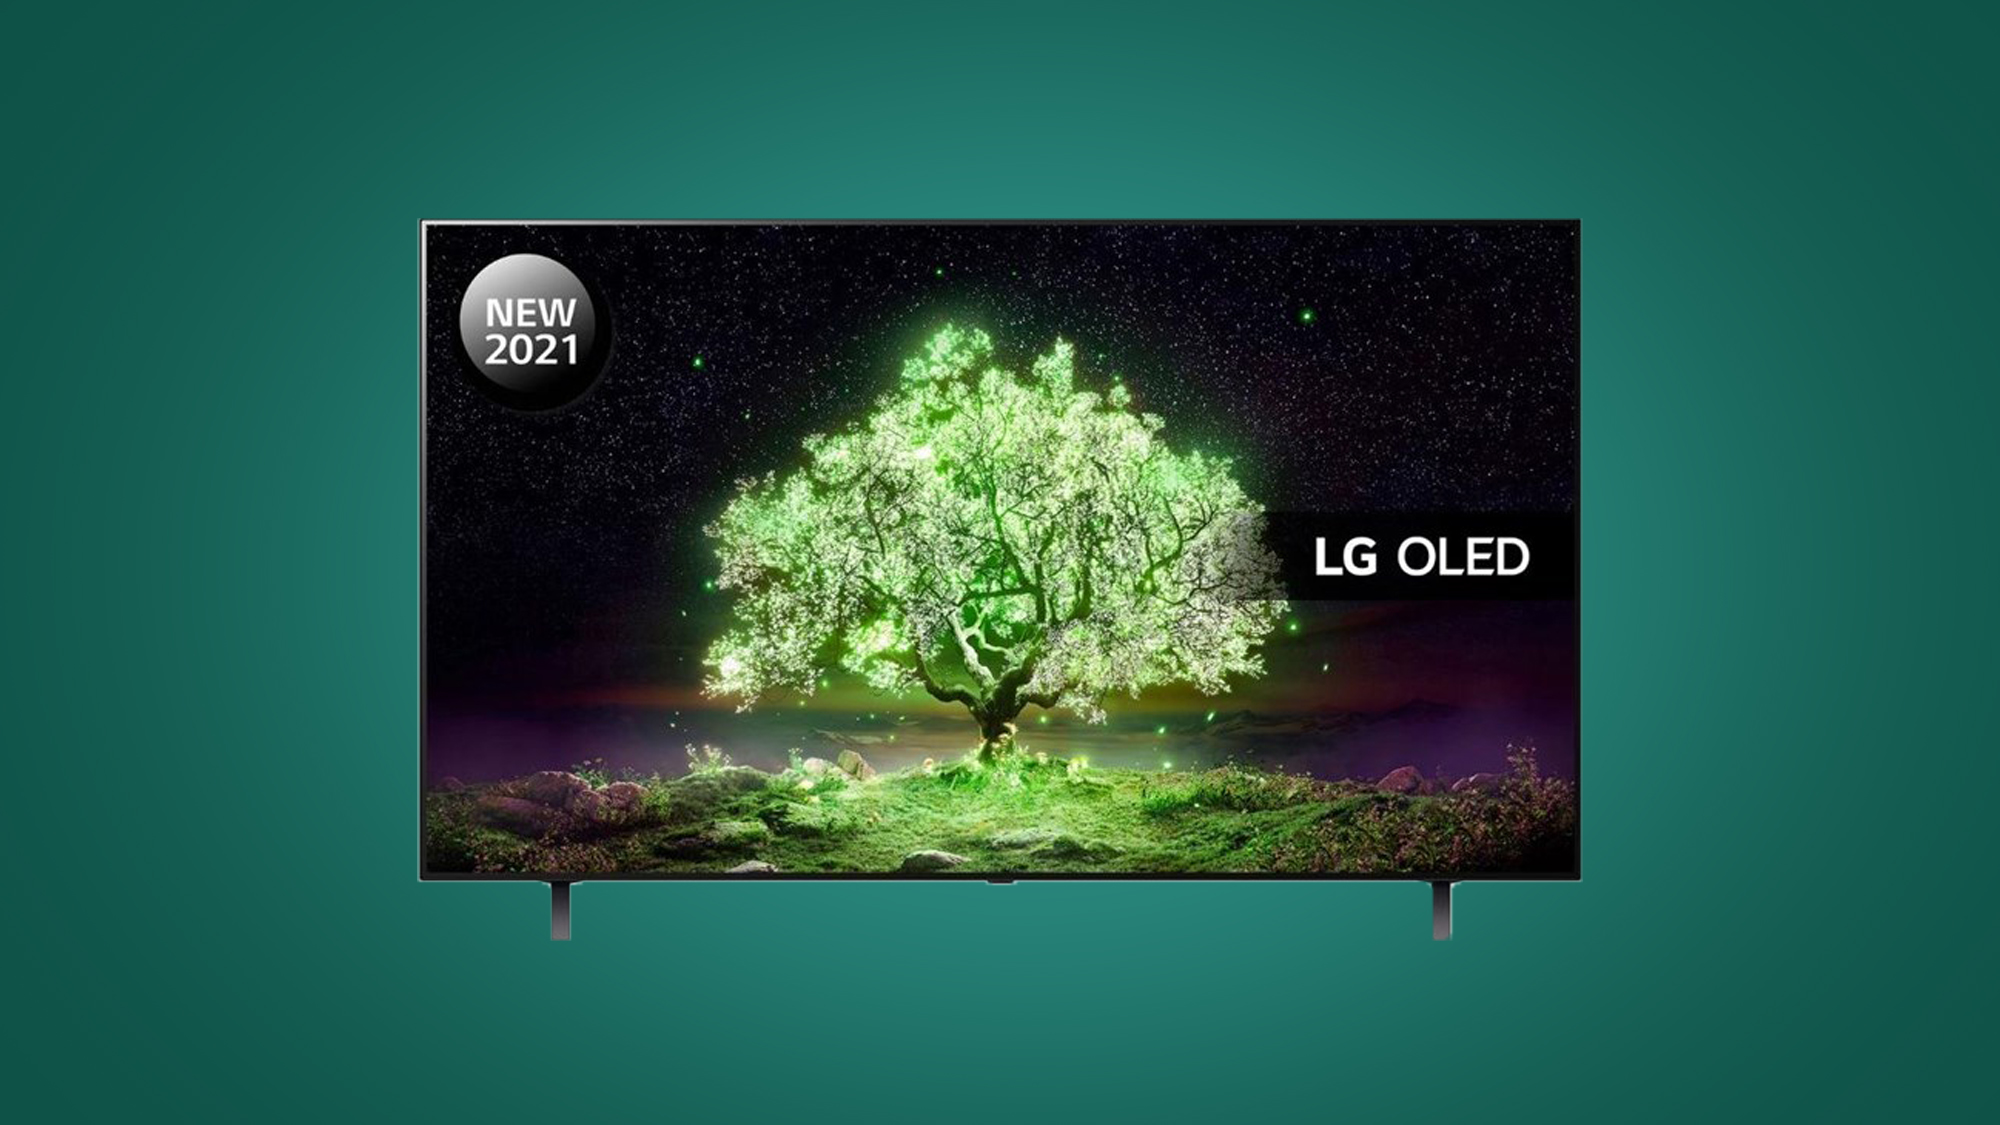 LG A1 OLED TV on a green background